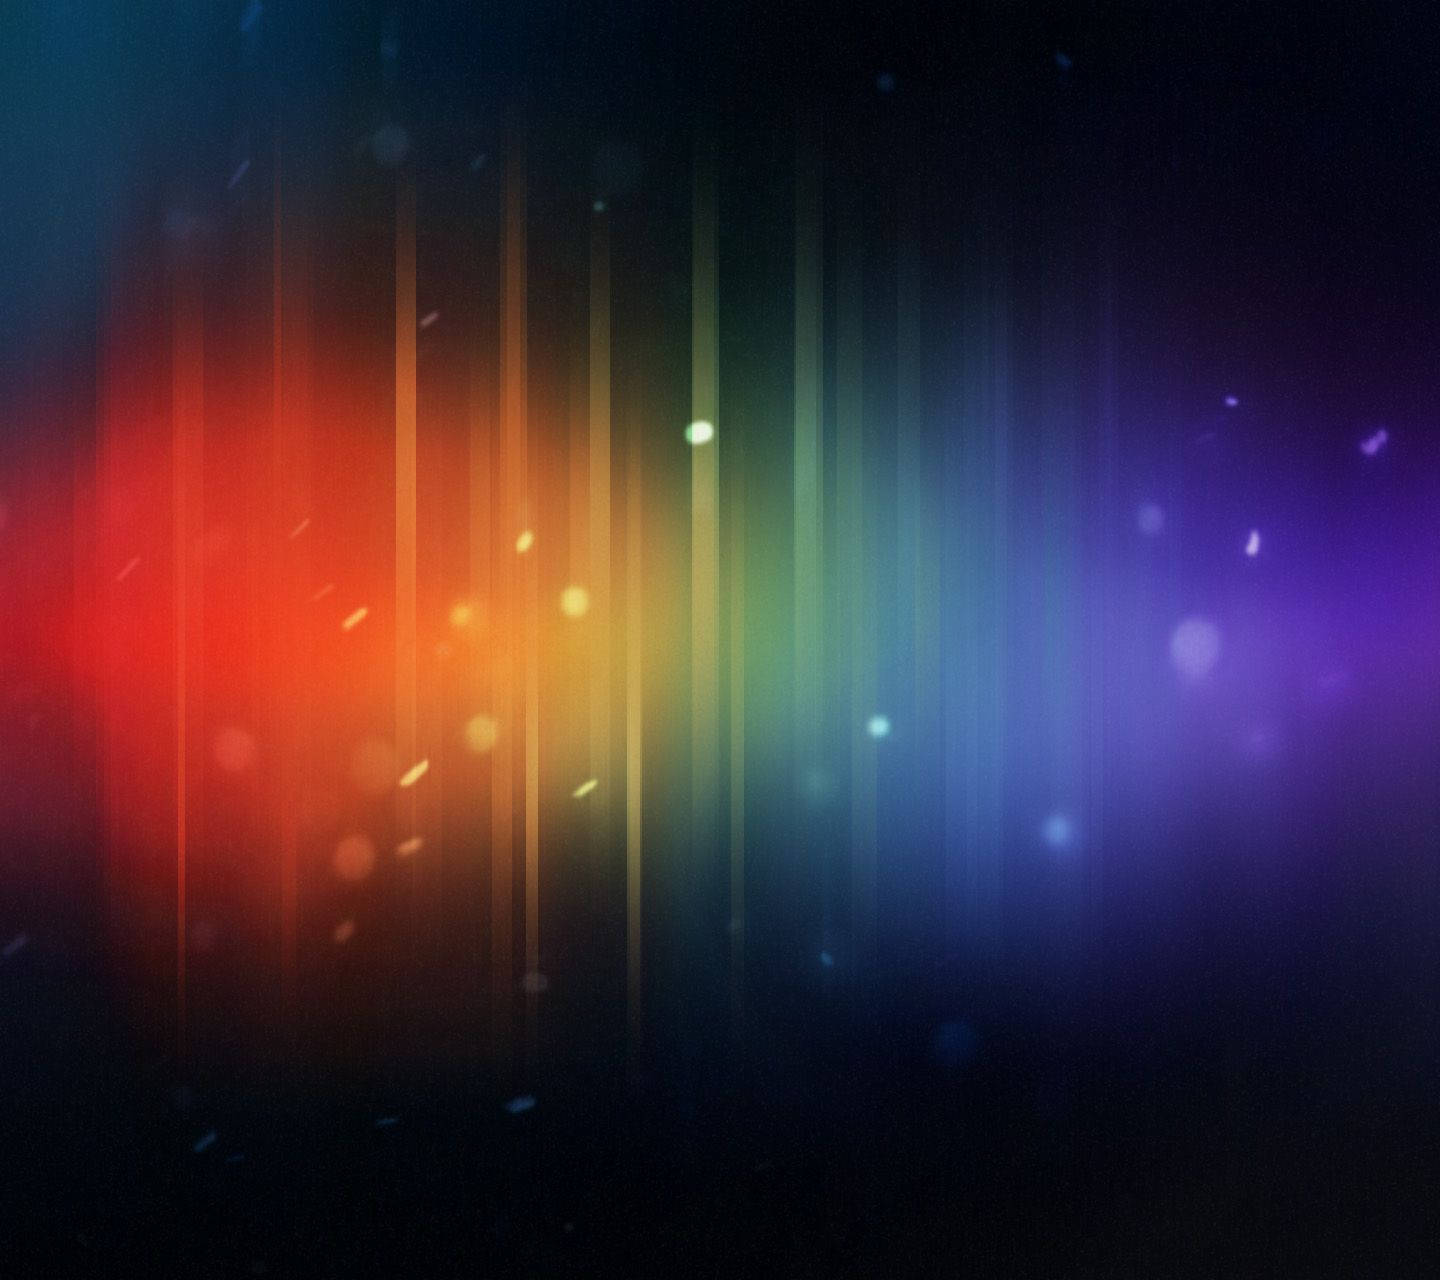 Android Jelly Bean in a Vibrant Rainbow Wallpaper